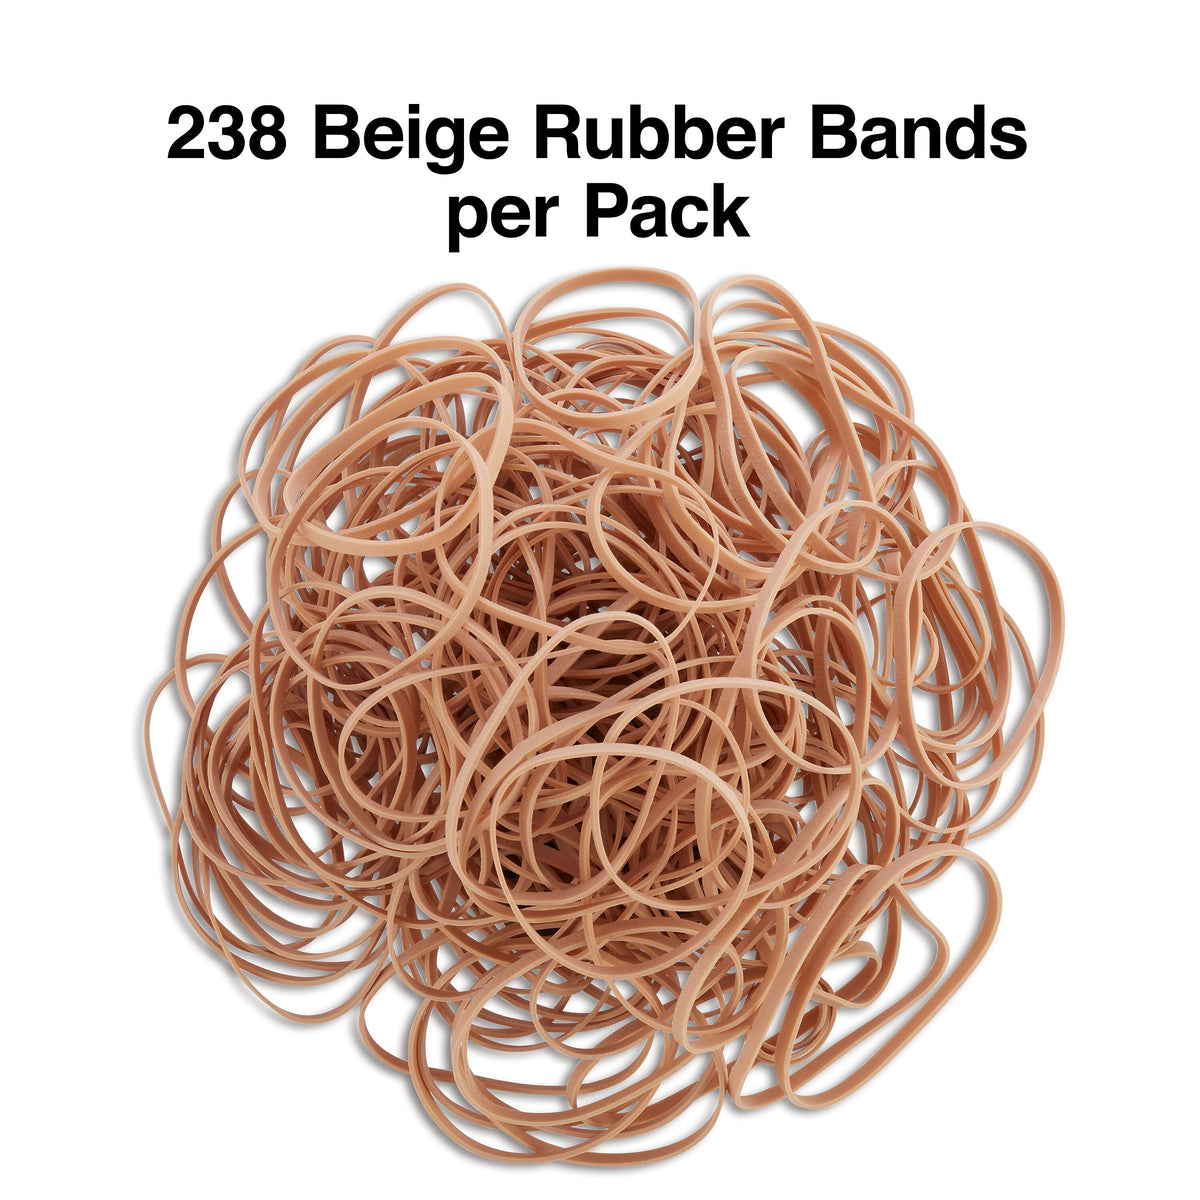 Staples Economy Rubber Bands, #32, 1/4 lb. Bag, 225/Pack